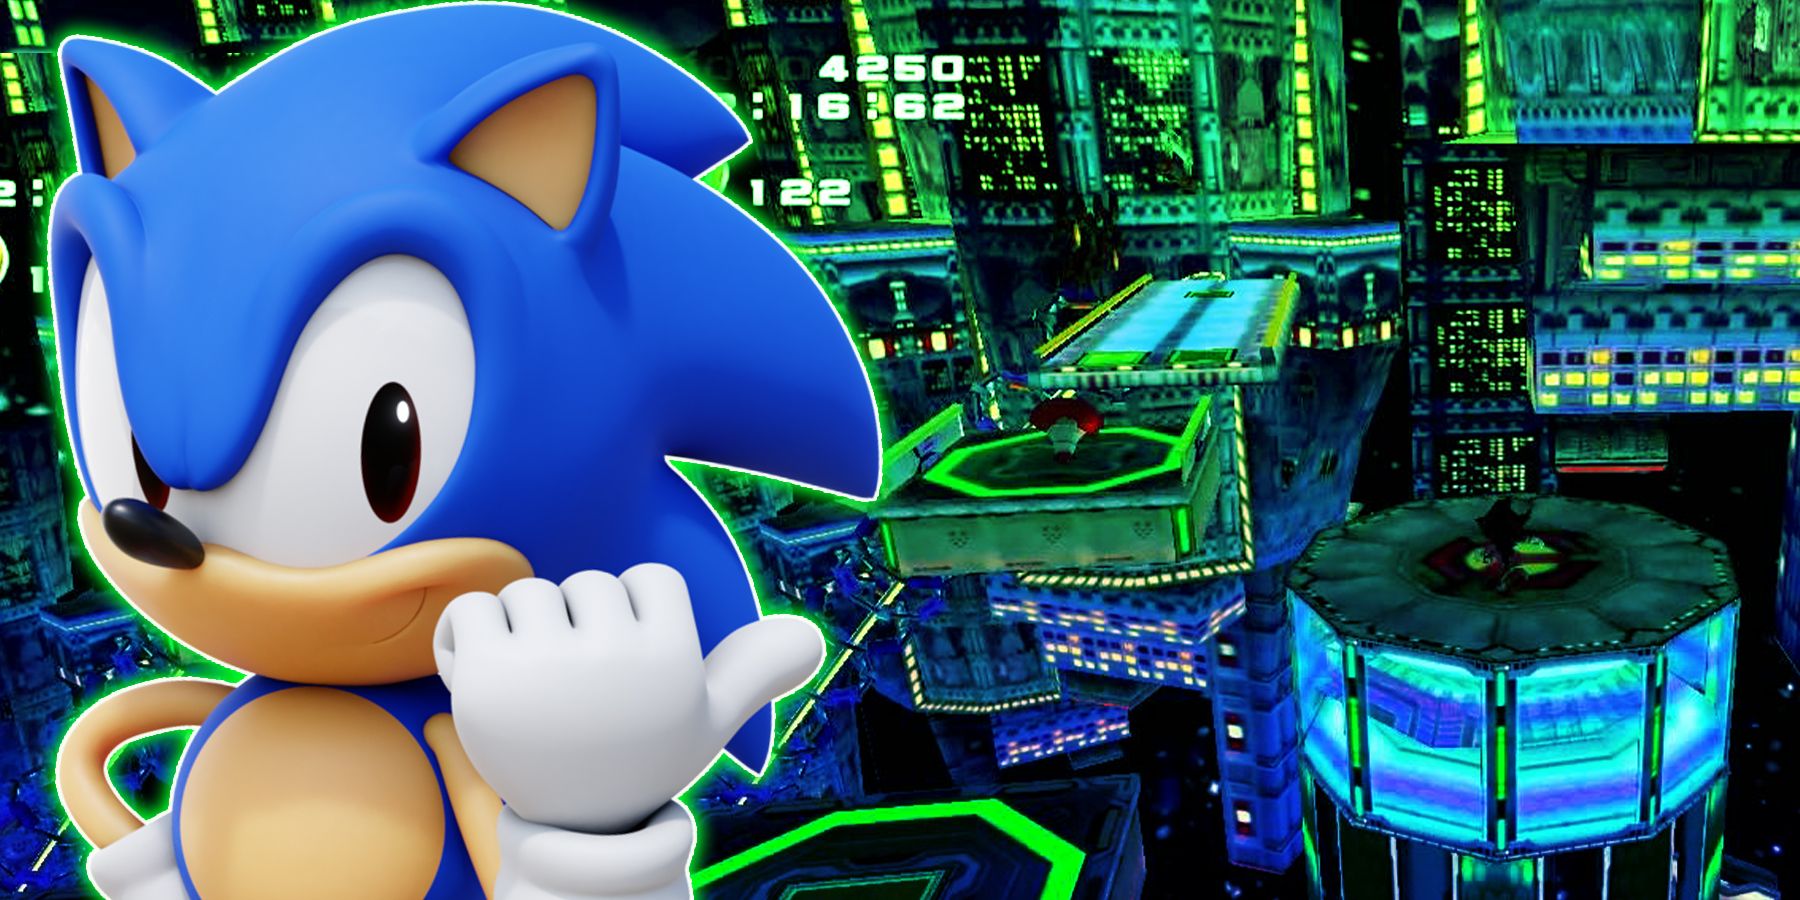 Sonic The Hedgehog: 10 Games To Play For The Story, Ranked